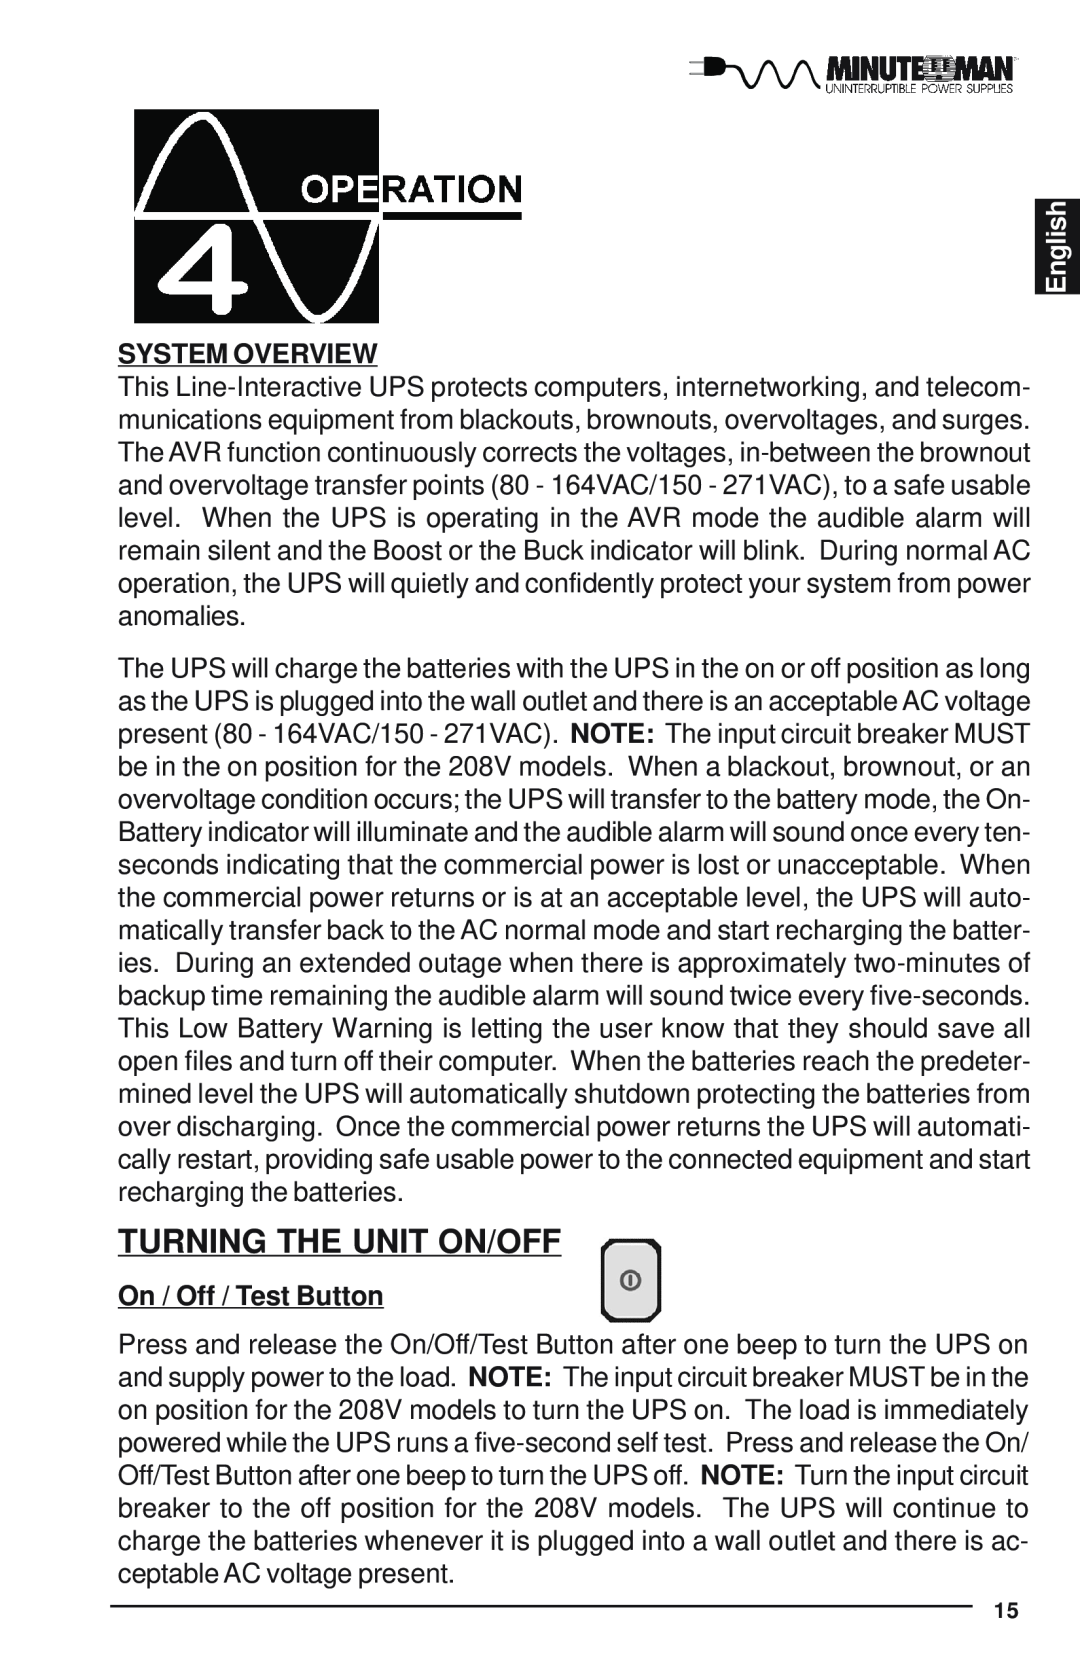 Minuteman UPS Enterprise Plus Series user manual Turning The Unit On/Off, English, System Overview, On / Off / Test Button 